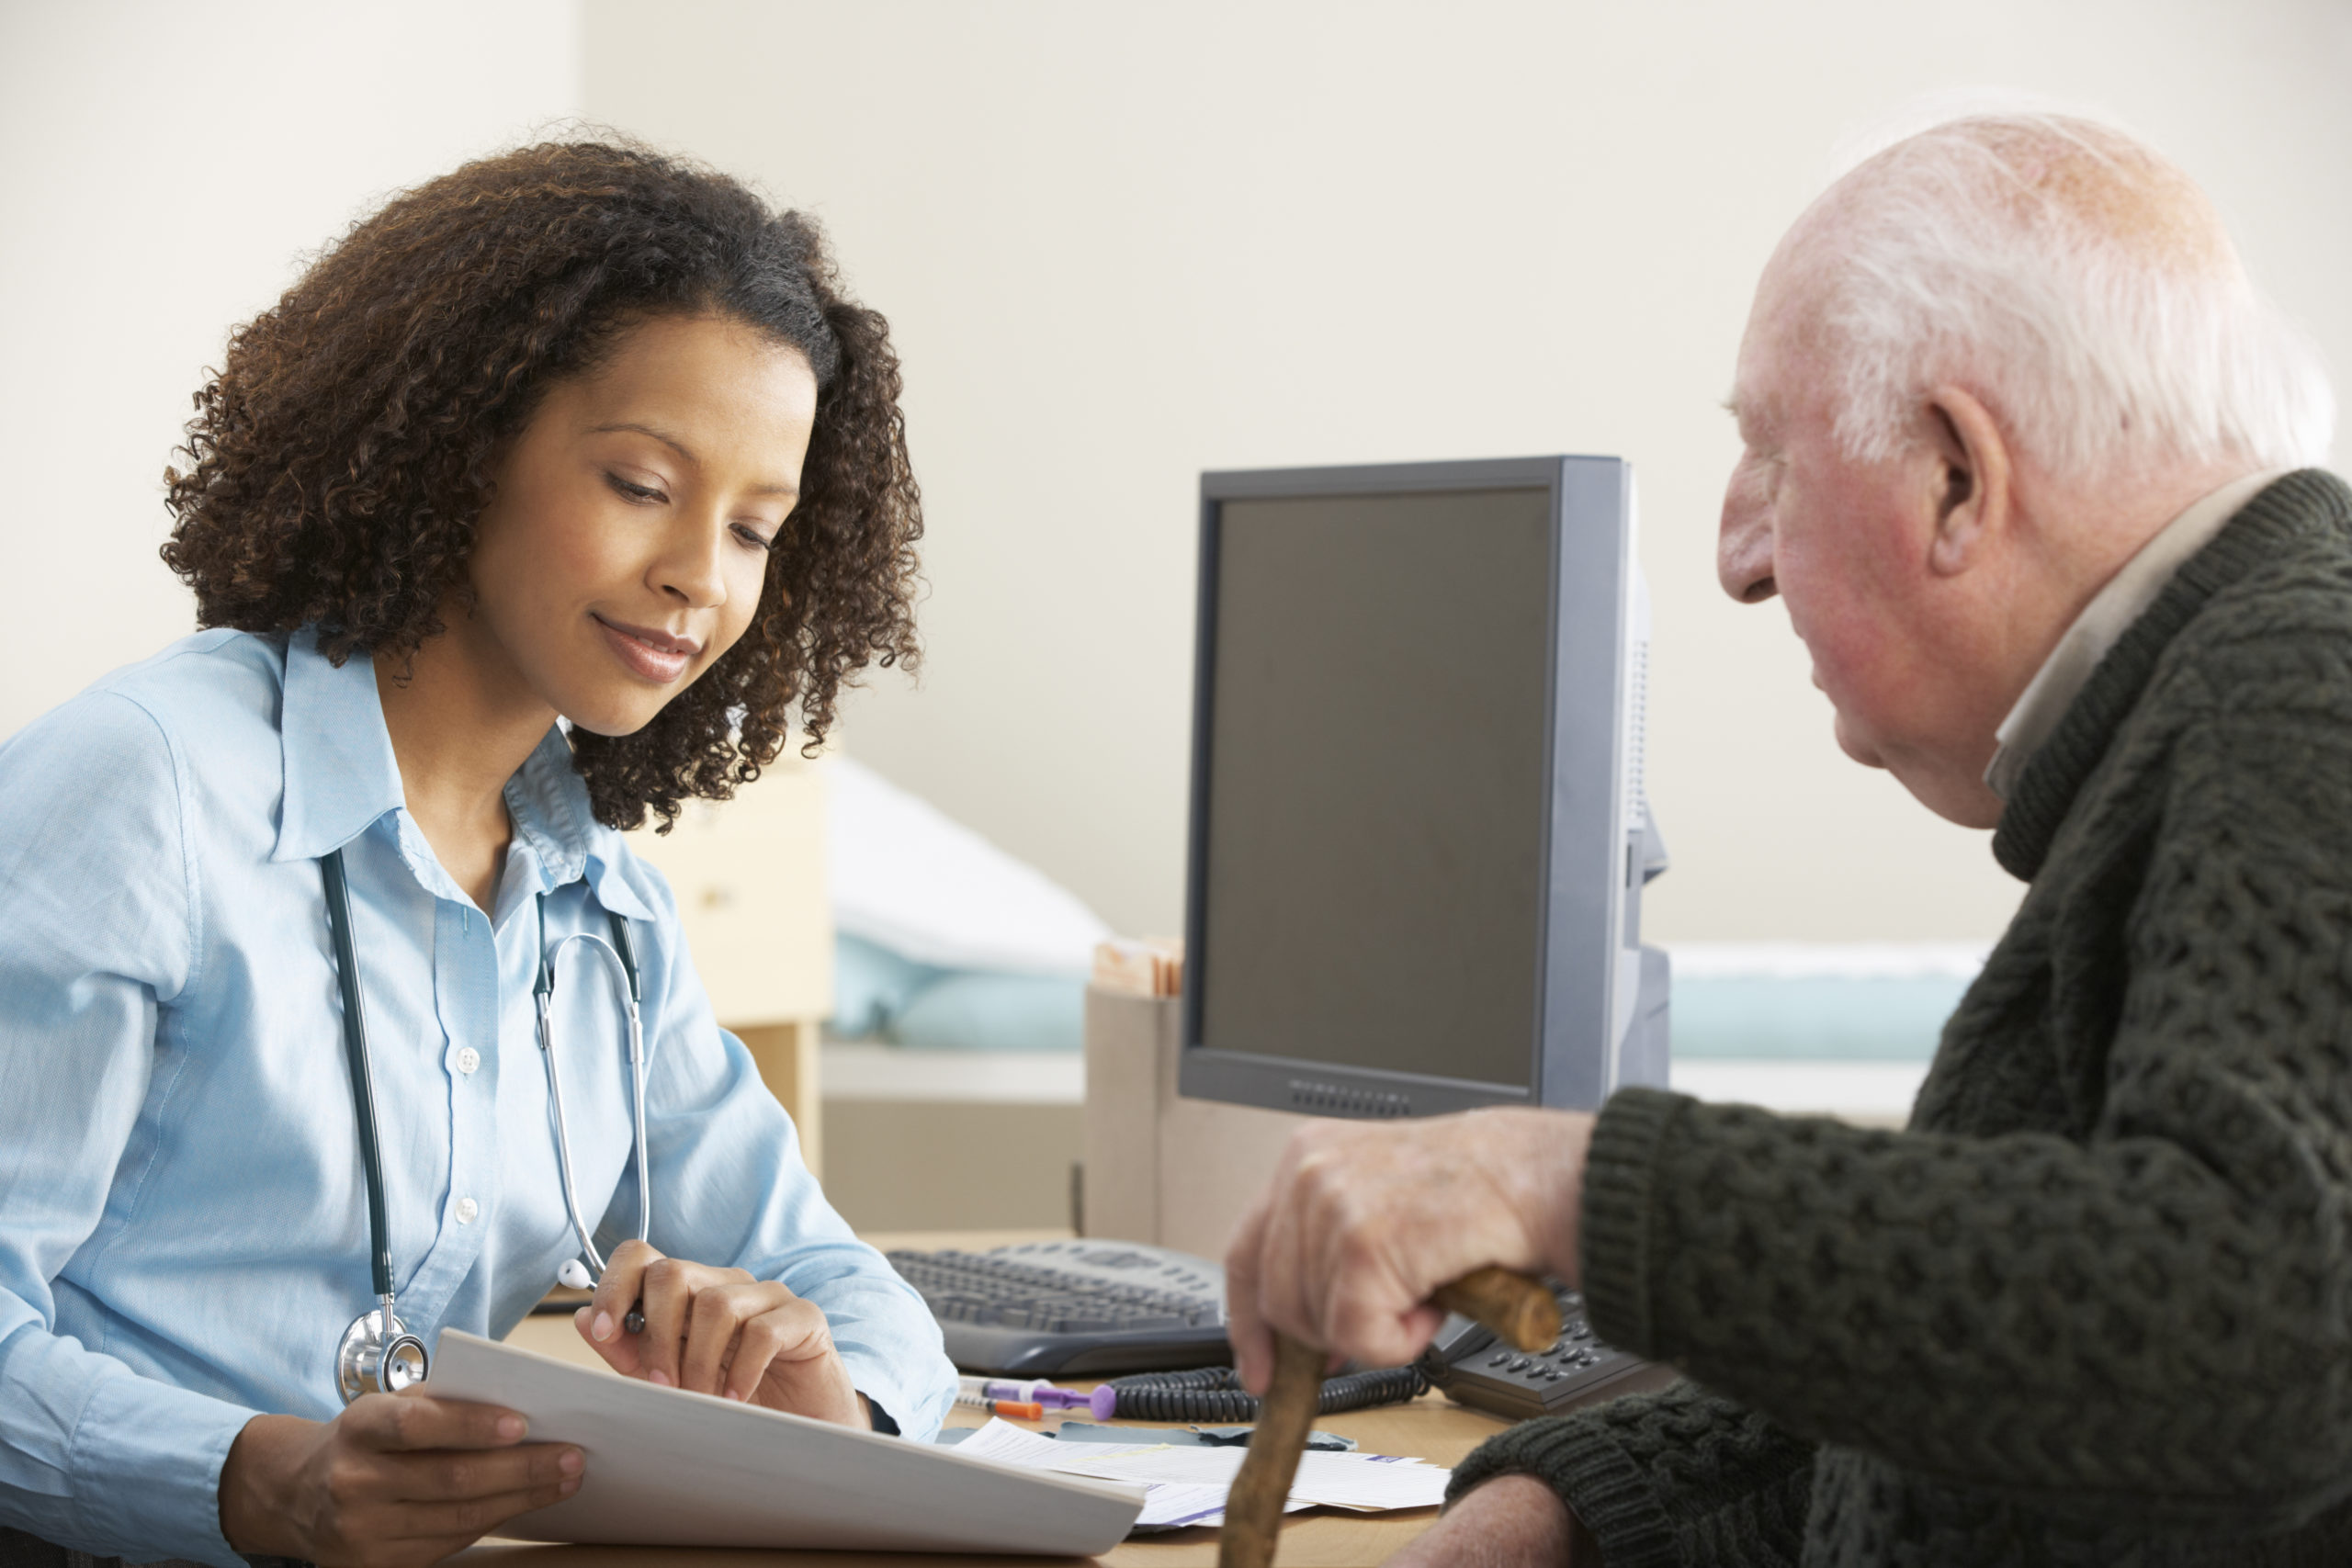 Image of female doctor speaking with an older male patient.